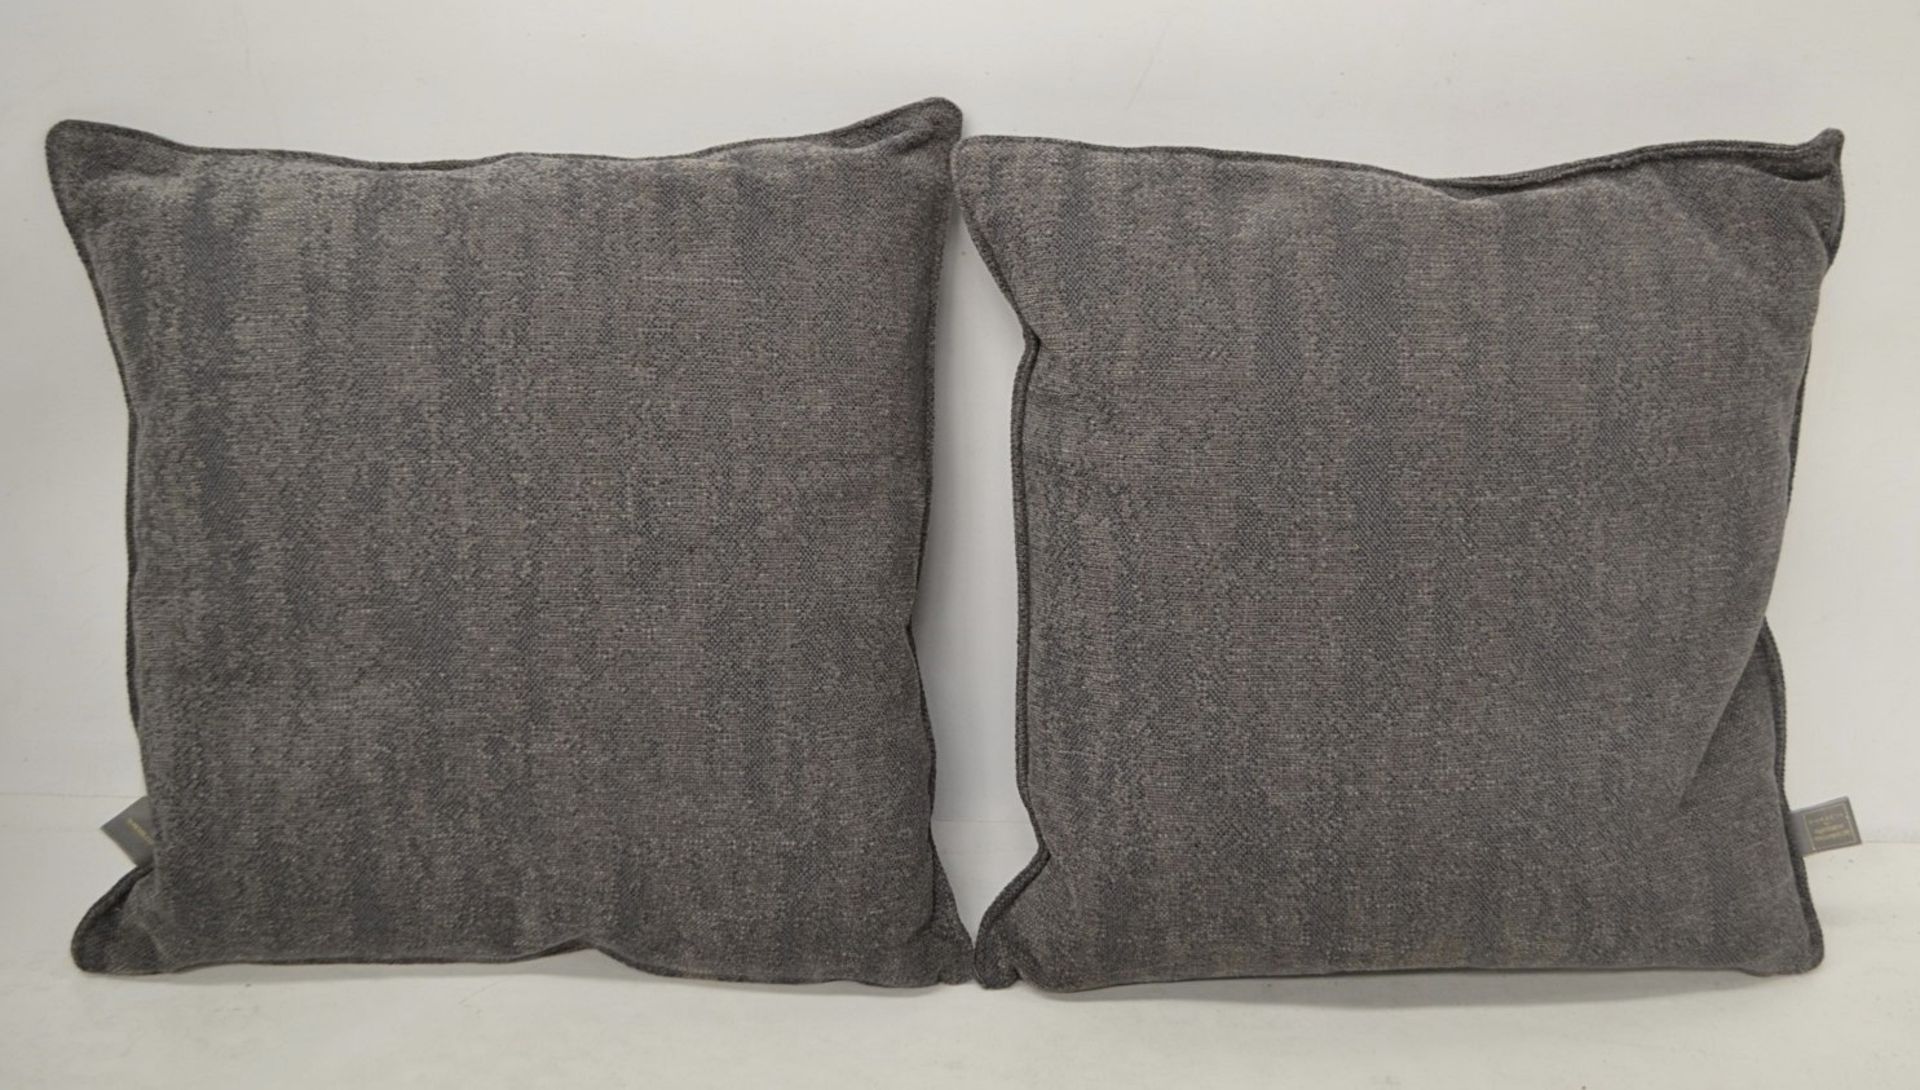 A Pair Of Duresta Esta Small Scatter Cushions - Fabric M2 - Ref: 5863261 P2/19 - CL087 - Location: A